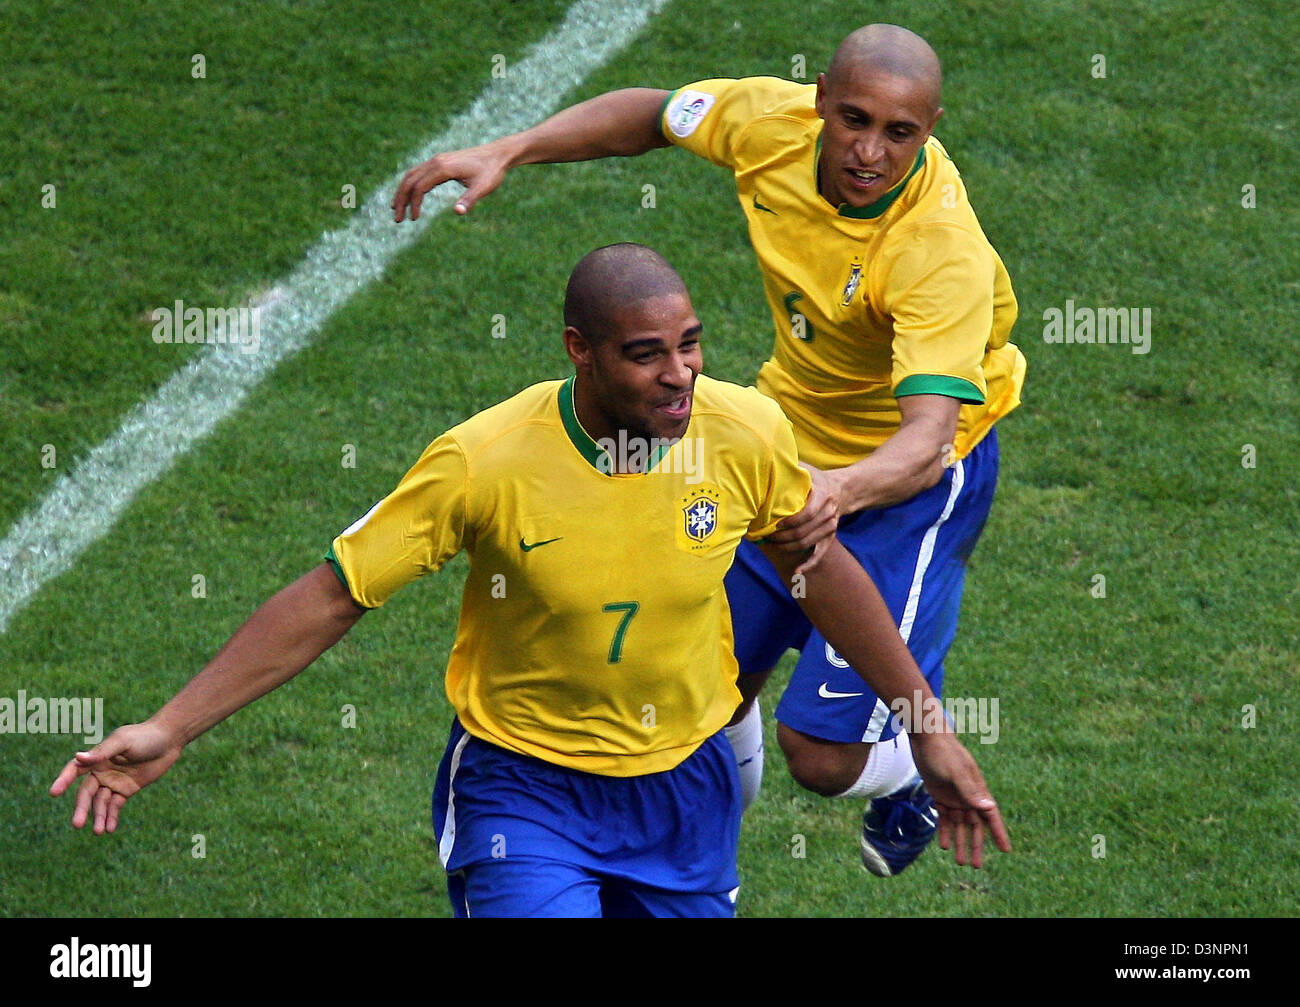 Brazilian Adriano (L) celebrates with his team-mate Roberto Carlos (R) after scoring his team's first goal against Australia during the group F match of the 2006 FIFA World Cup between Brazil and Australia in Munich, Germany, Sunday, 18 June 2006. Photo: KARL-JOSEF HILDENBRAND +++ Mobile Services OUT +++ Please refer to FIFA's Terms and Conditions Stock Photo